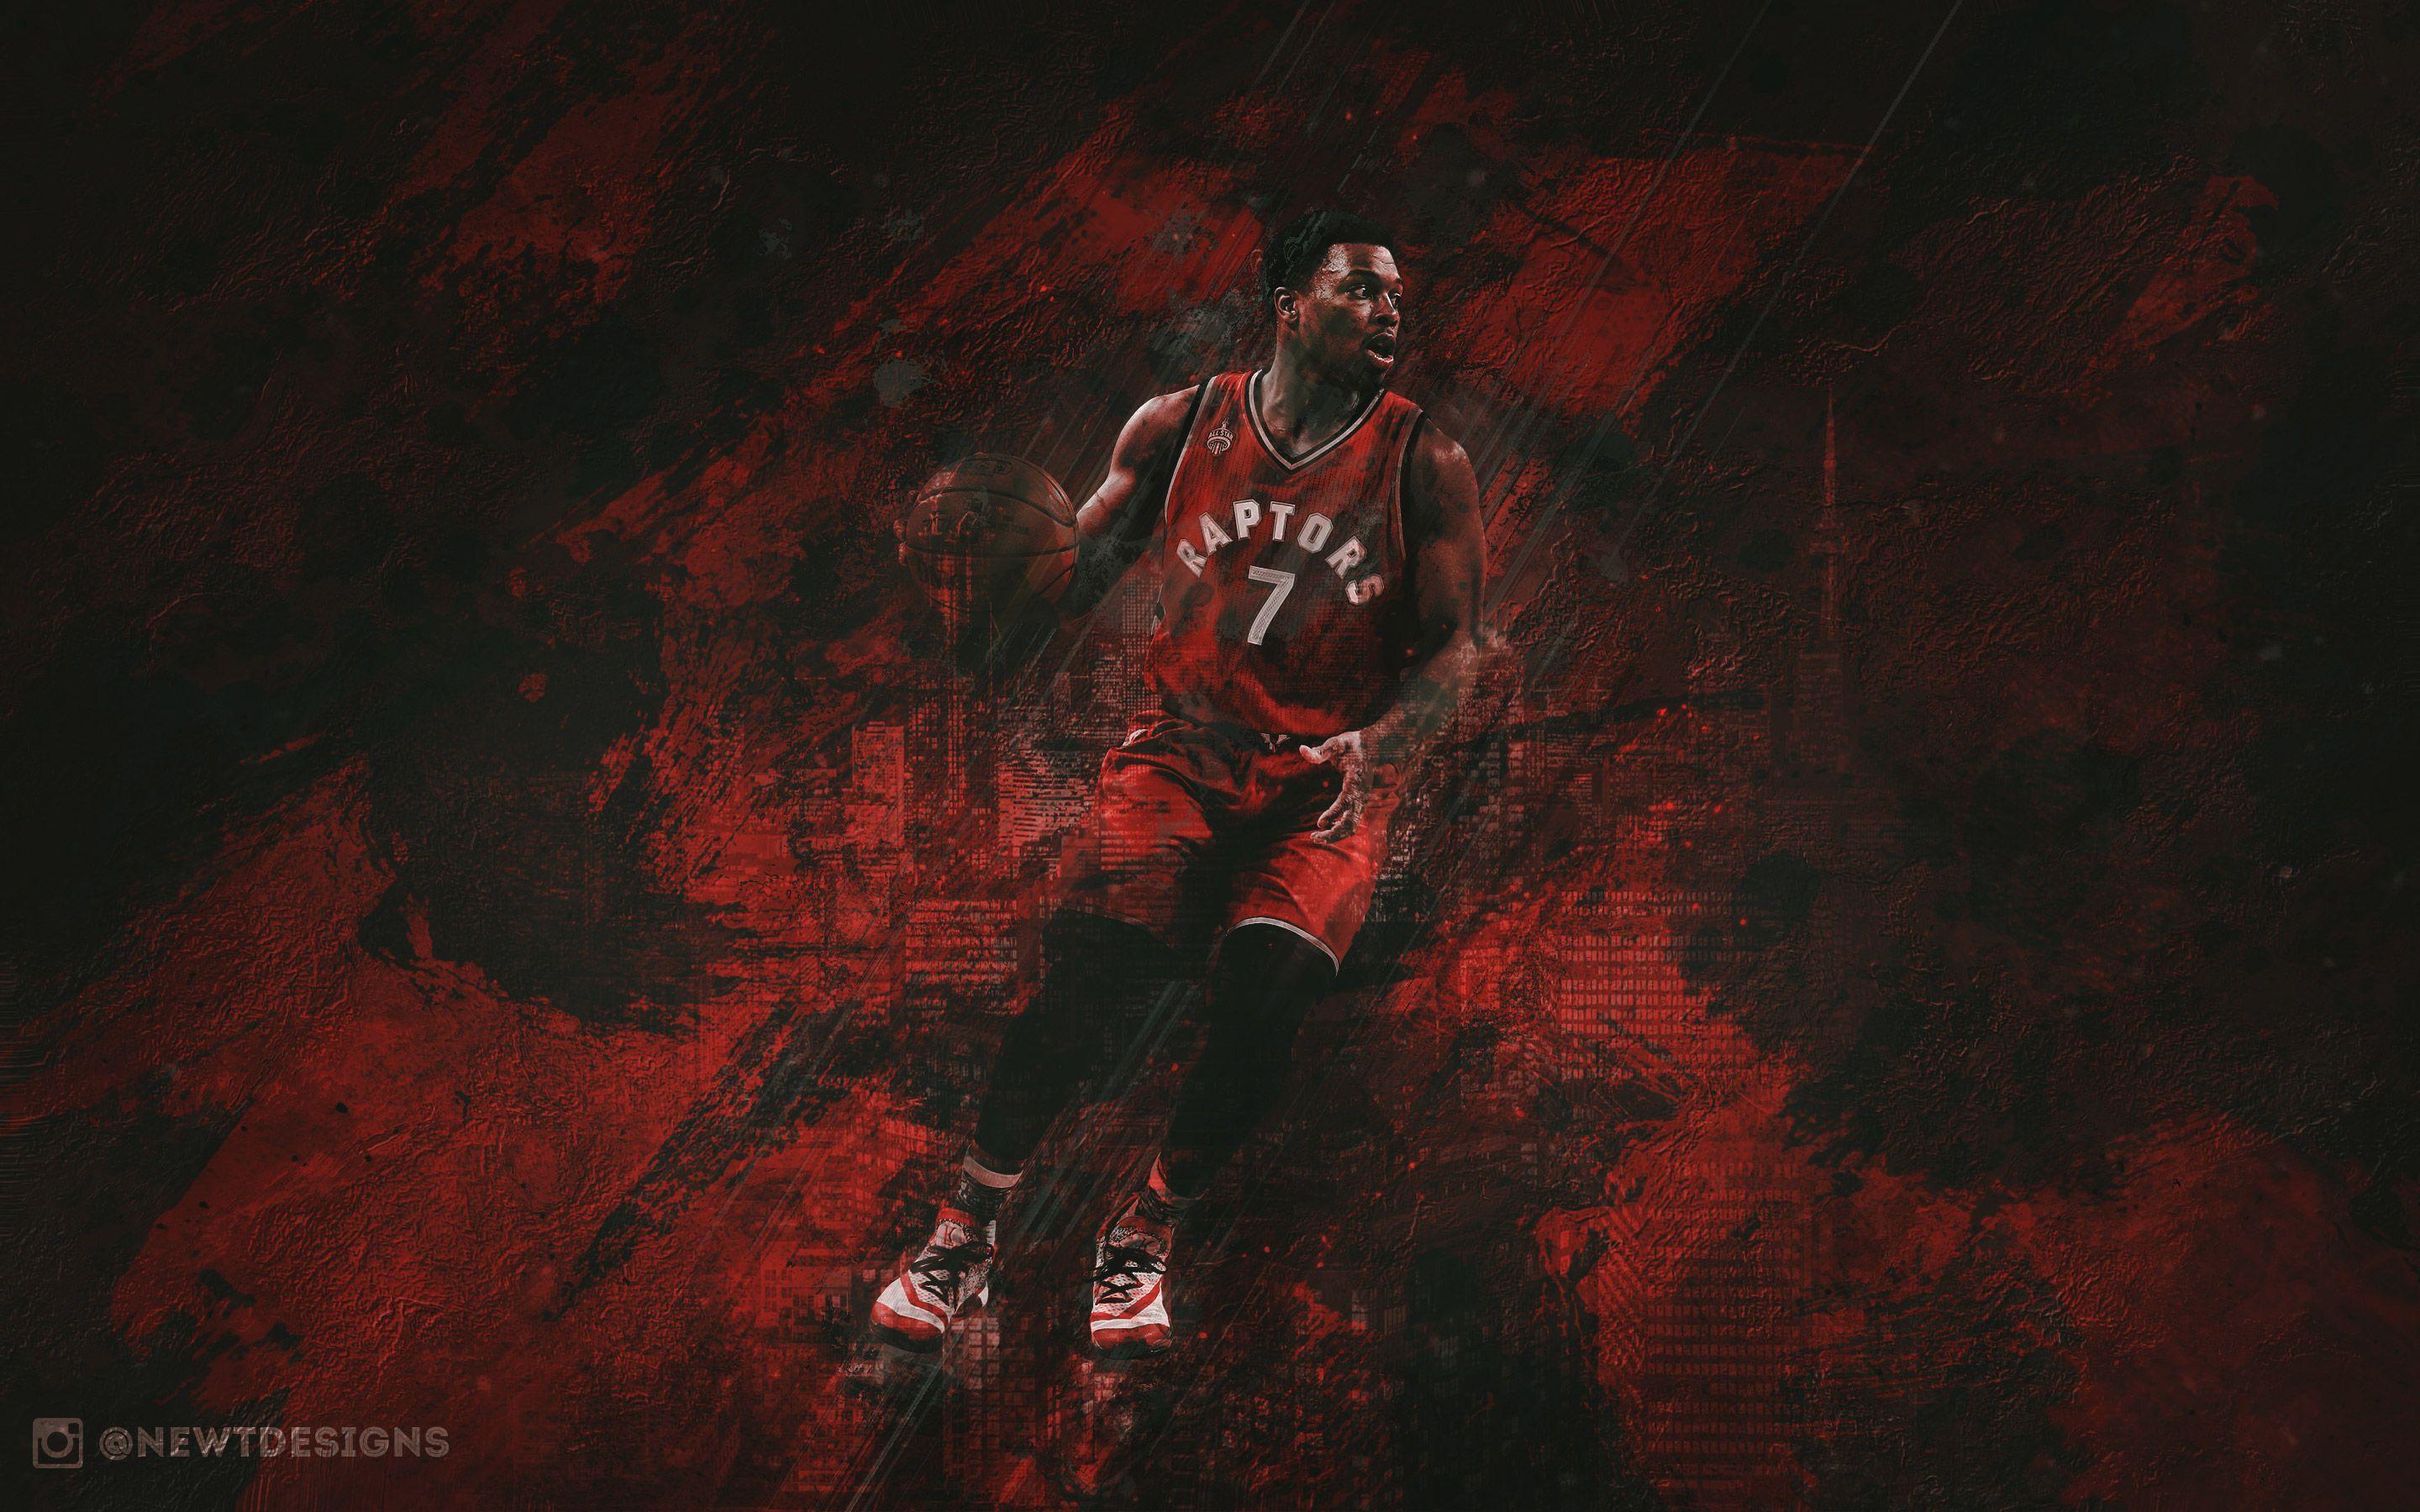 Kyle Lowry Wallpapers - Wallpaper Cave